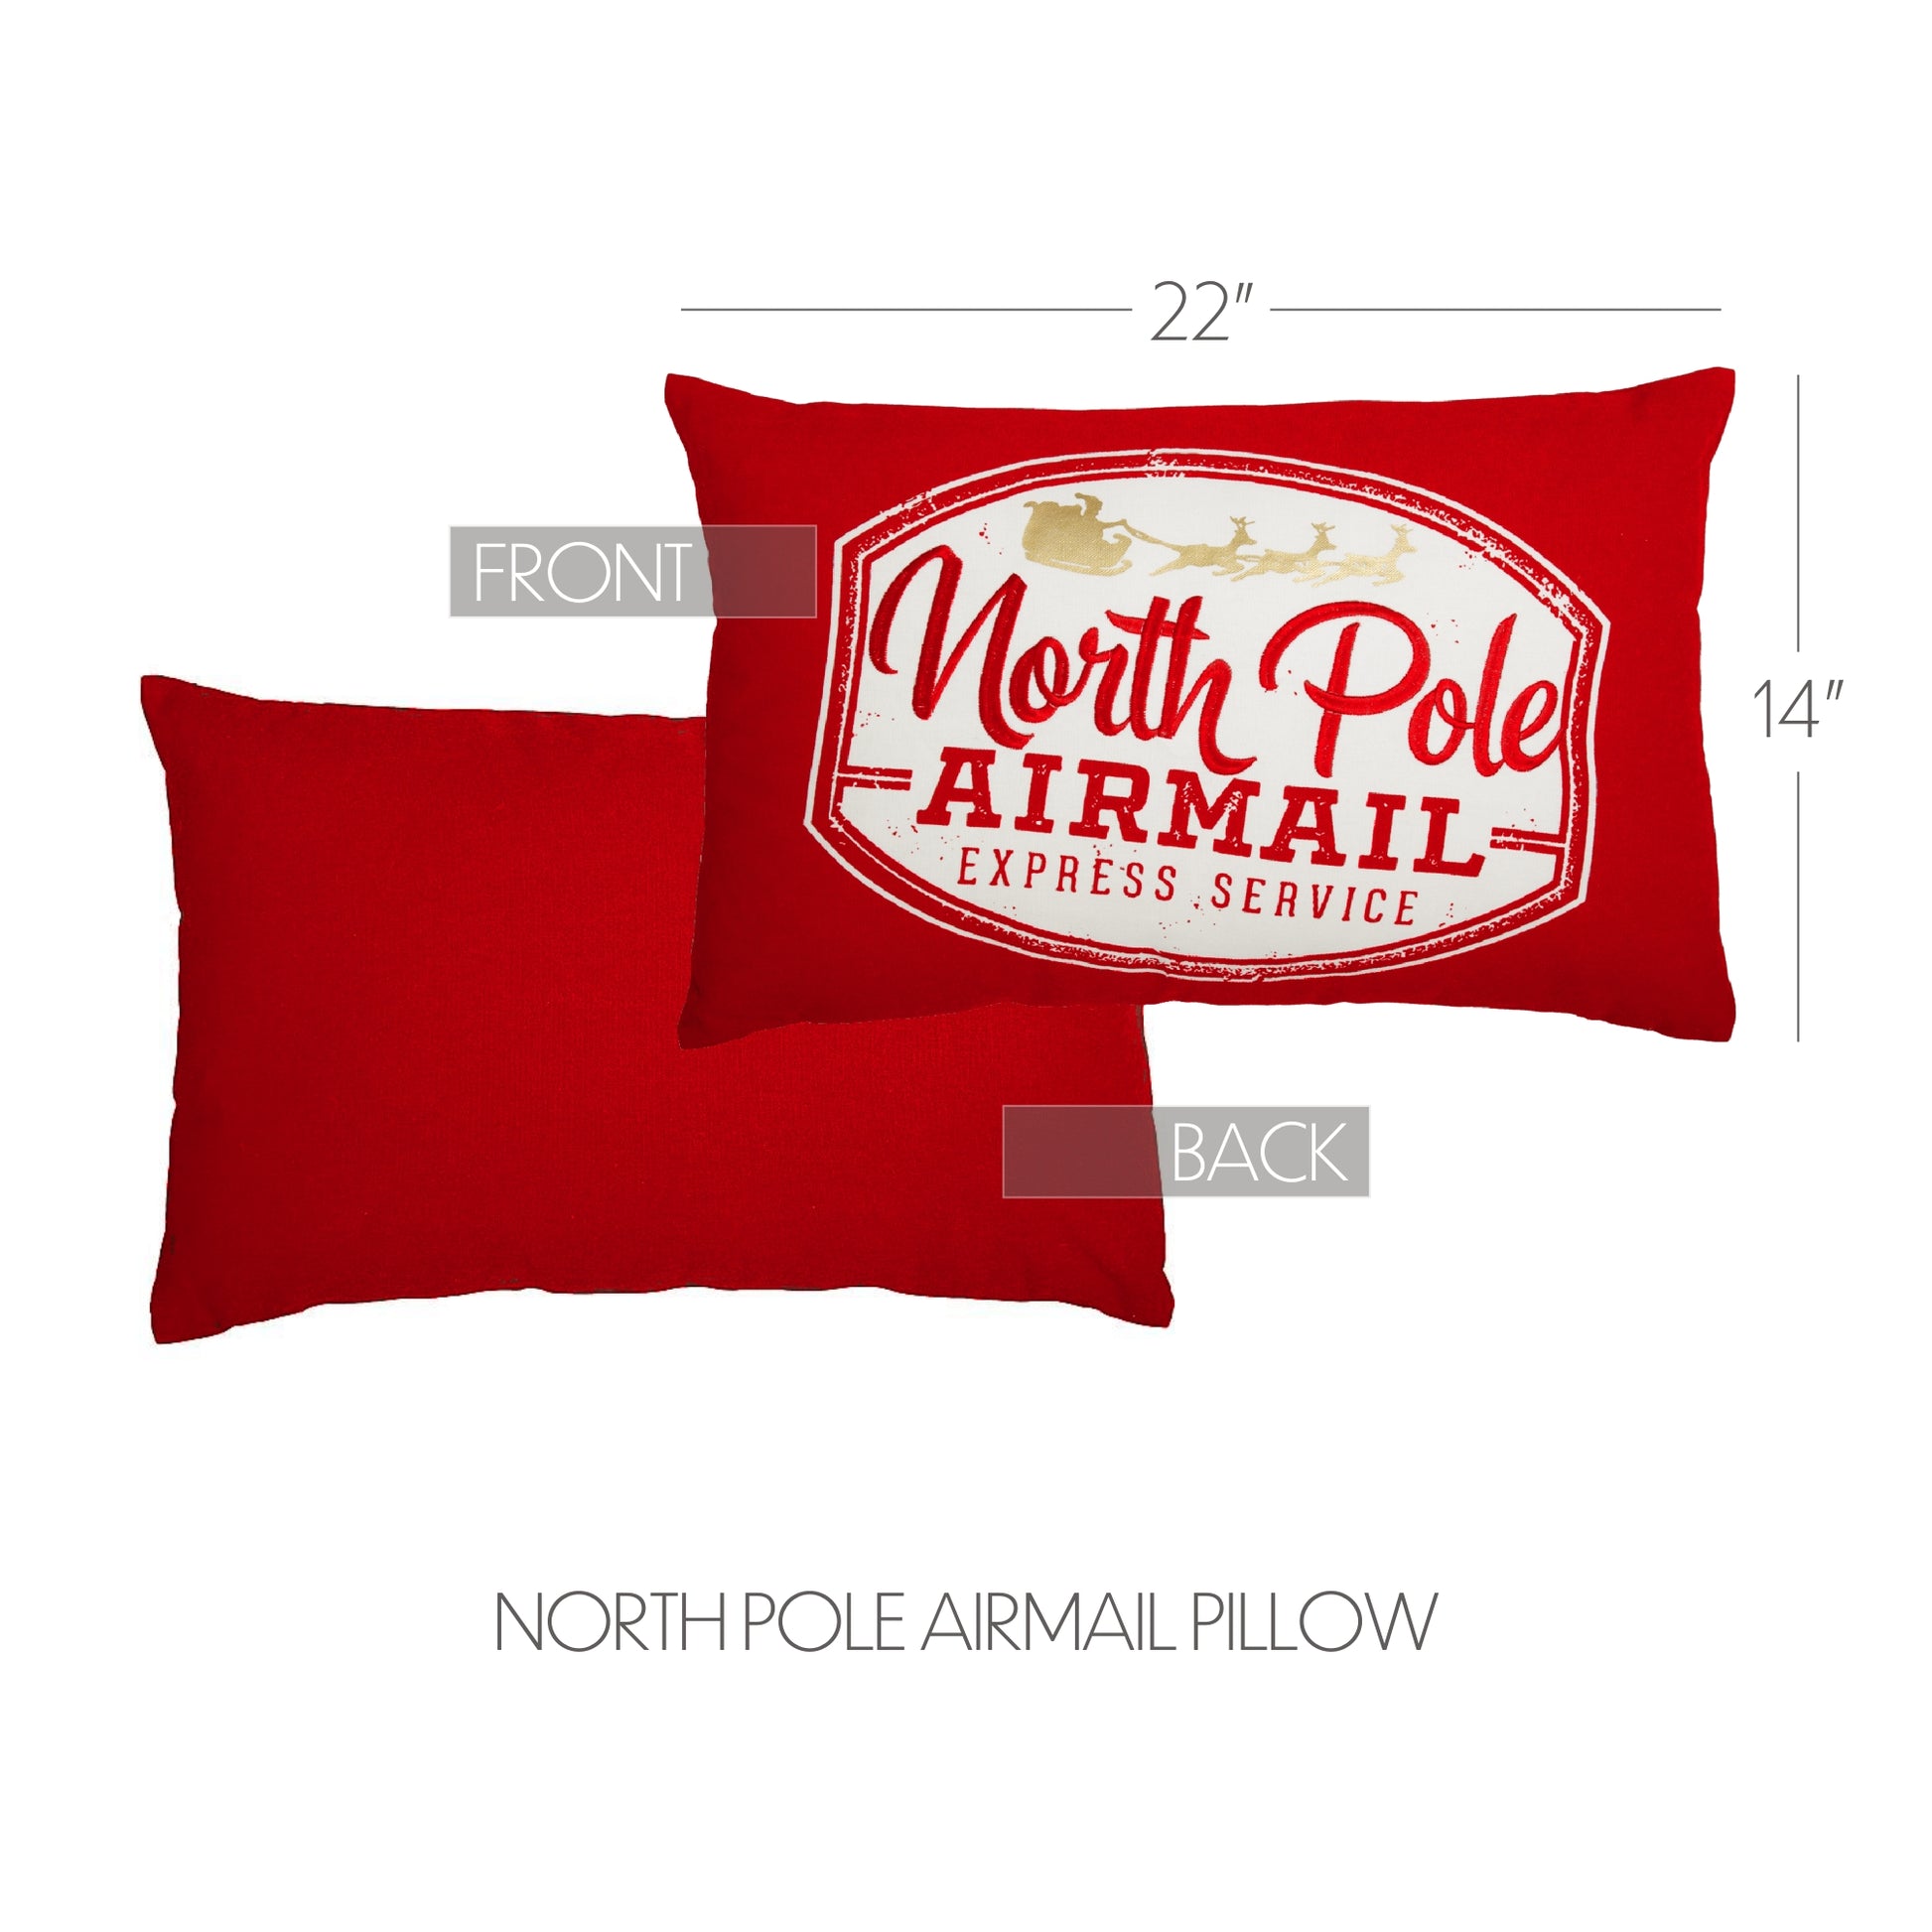 North Pole Bed and Breakfastchristmas Pillow Cover Christmas Pillow Cover  Christmas Decor Christmas Decorations Christmas Throw Pillow 